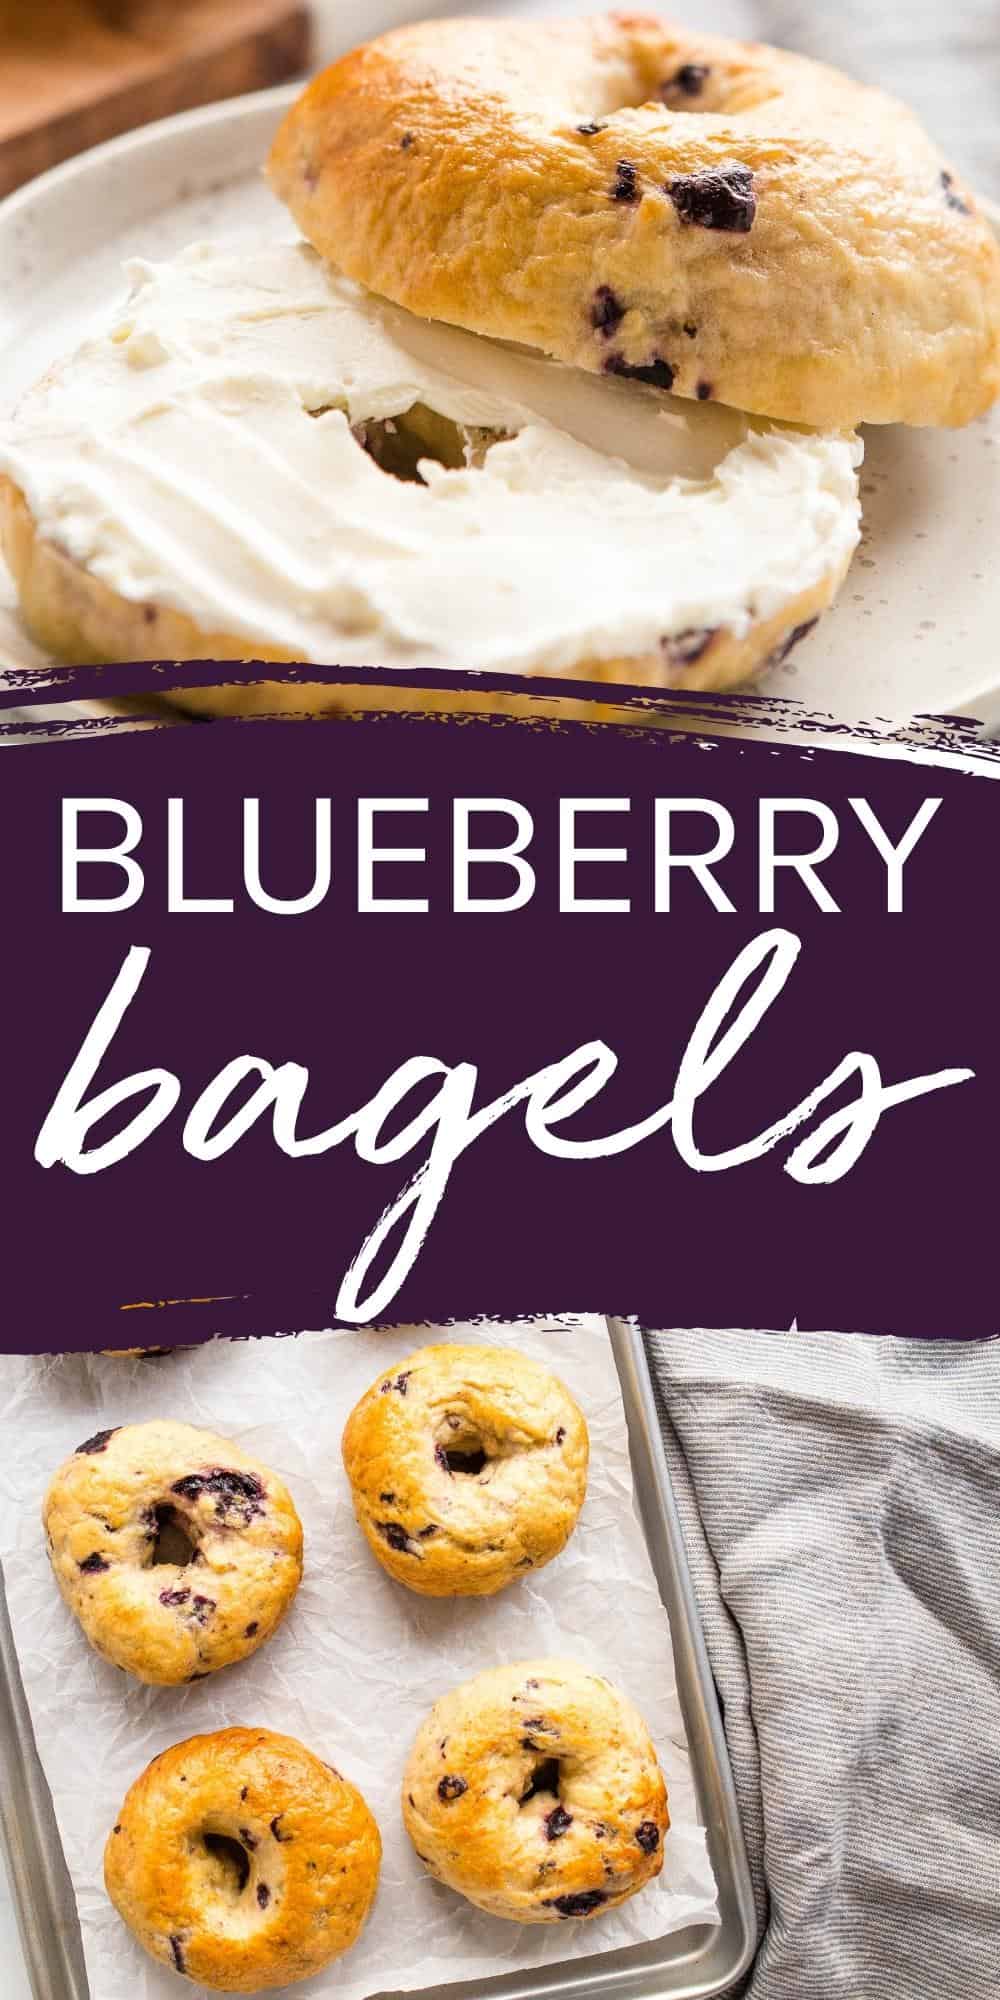 These Homemade Blueberry Bagels are perfectly dense and chewy, they’re SO easy to make with no special equipment or ingredients, no refined sugar, and fresh blueberries! Recipe from thebusybaker.ca! #blueberrybagels #bagel #homemade #bread #easyrecipe #homemadebread via @busybakerblog